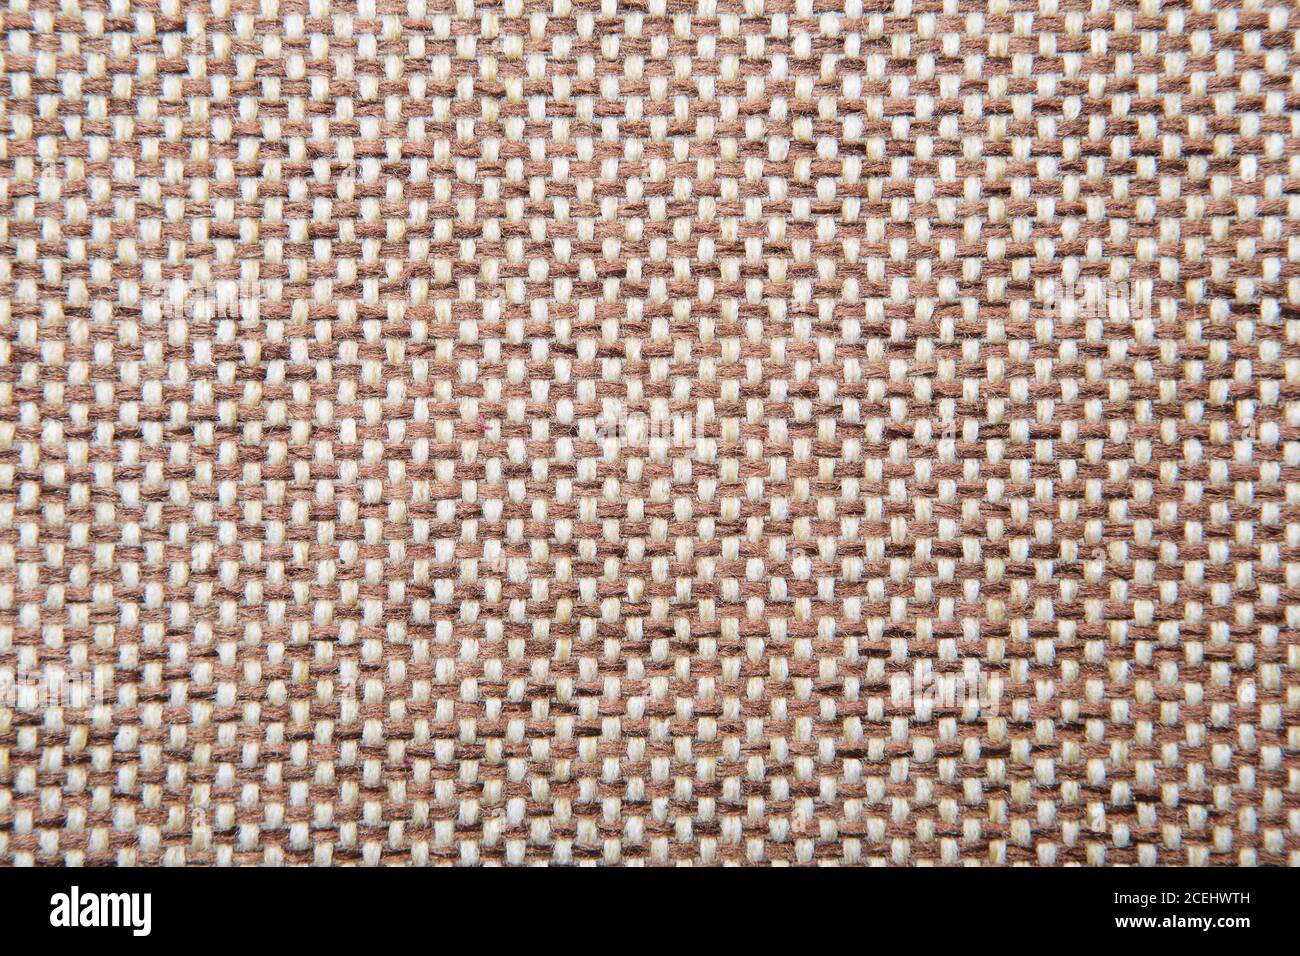 Brown checkered Rough Fabric Texture, Pattern, Background Stock Photo